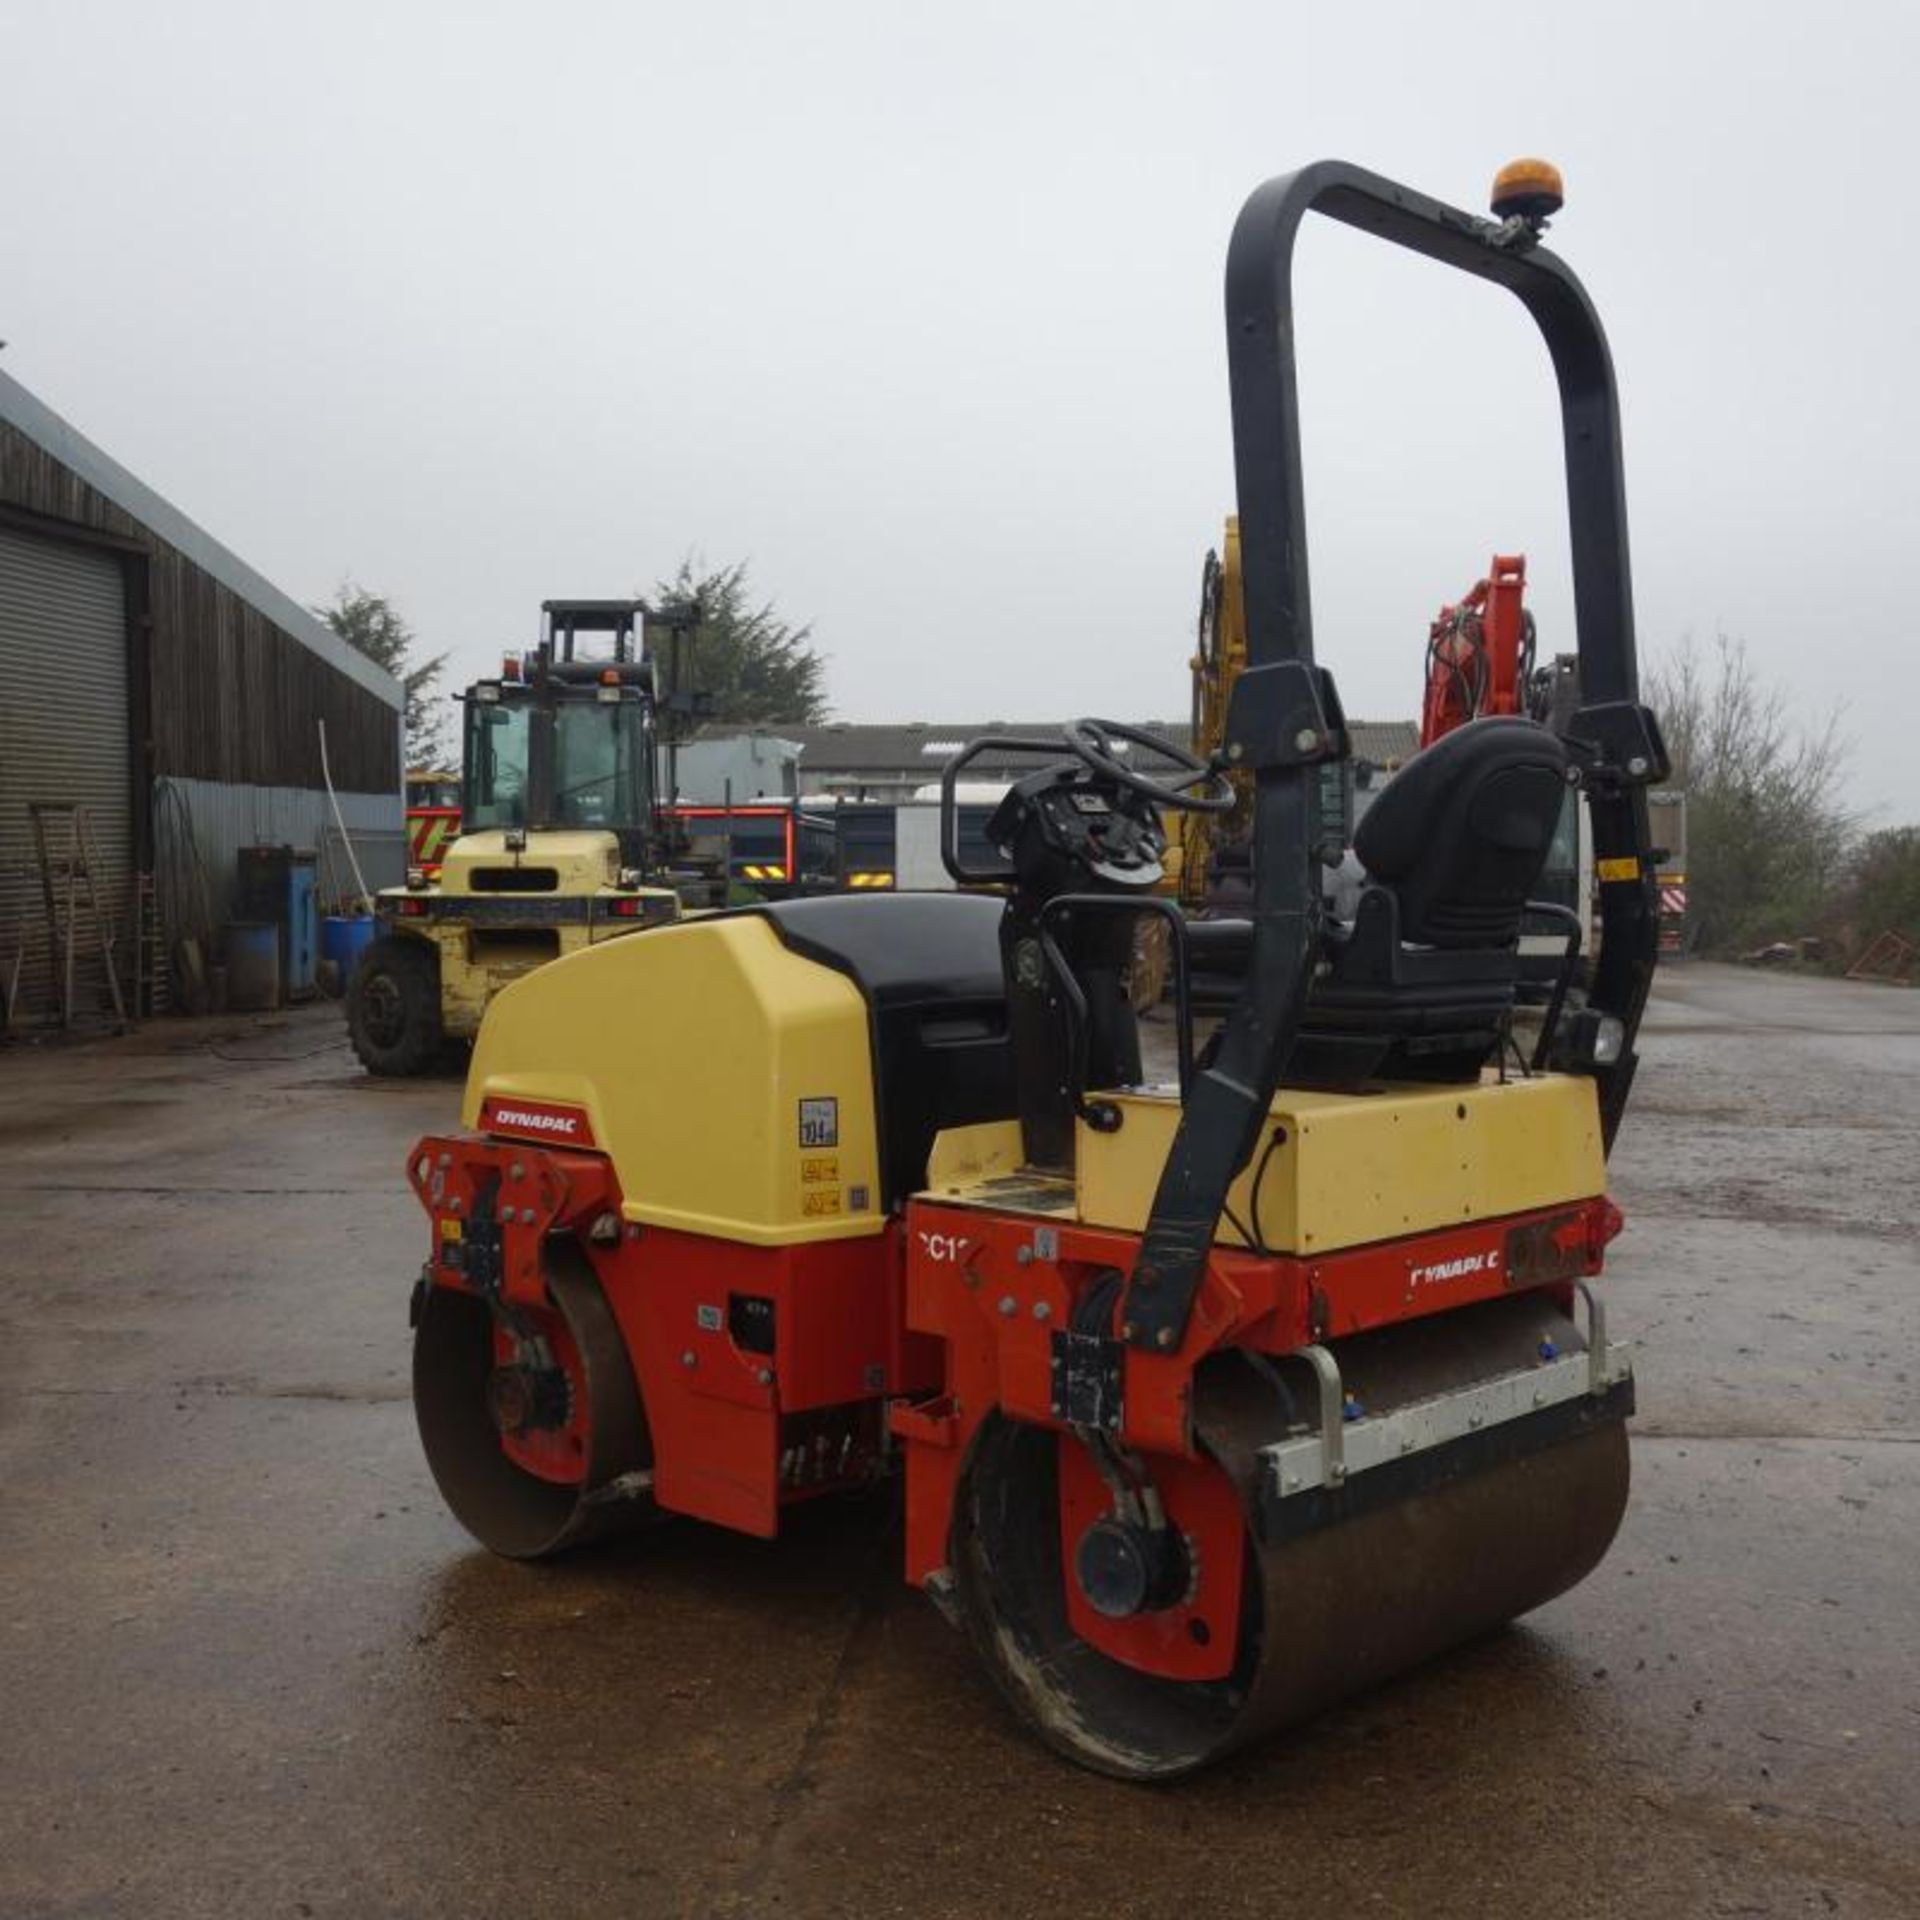 2012 Dynapac Cc1200 Roller, Only 479 Hours From New - Image 4 of 6